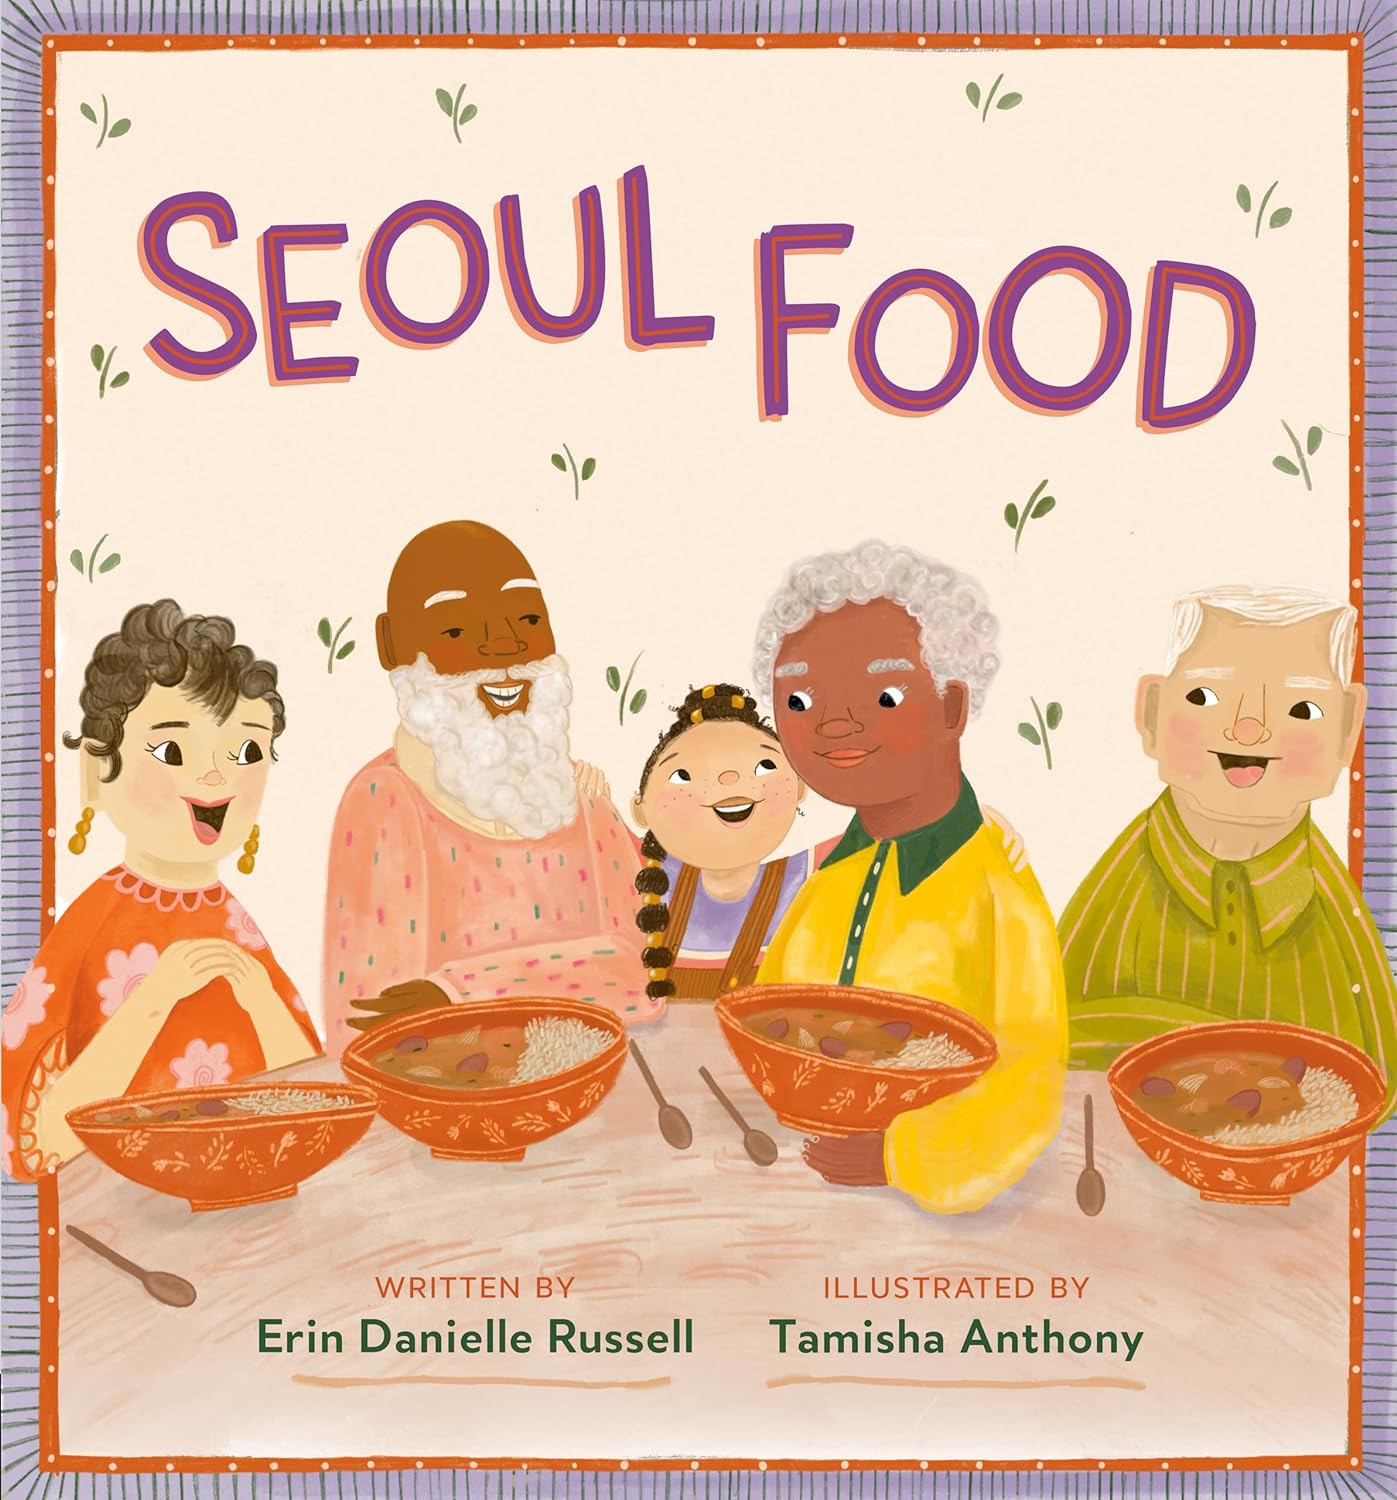 Seoul Food children's book about mixed Asian-Black family and culture